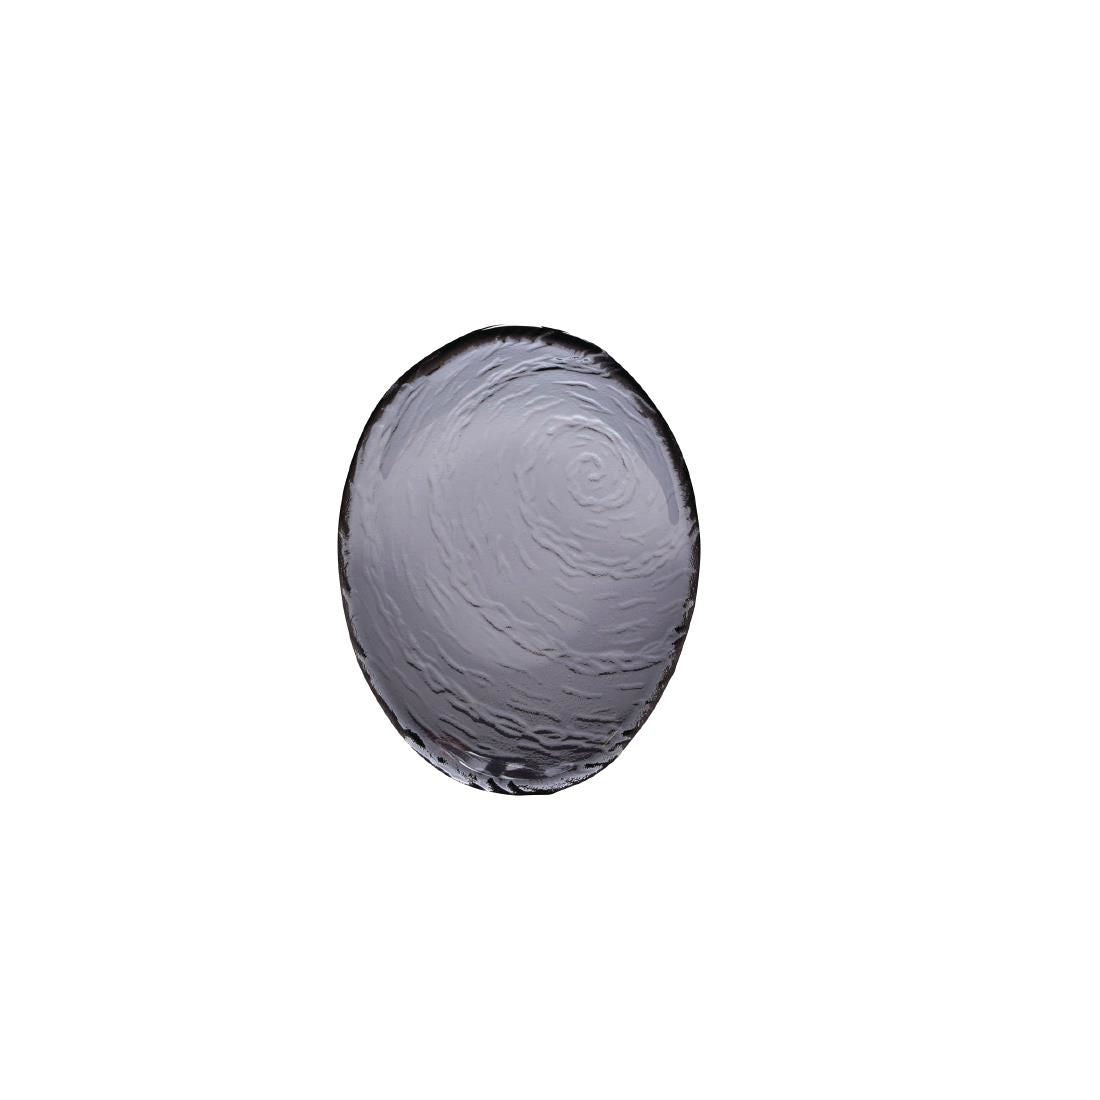 VV717 Steelite Scape Glass Smoked Oval Bowls 200mm (Pack of 12)